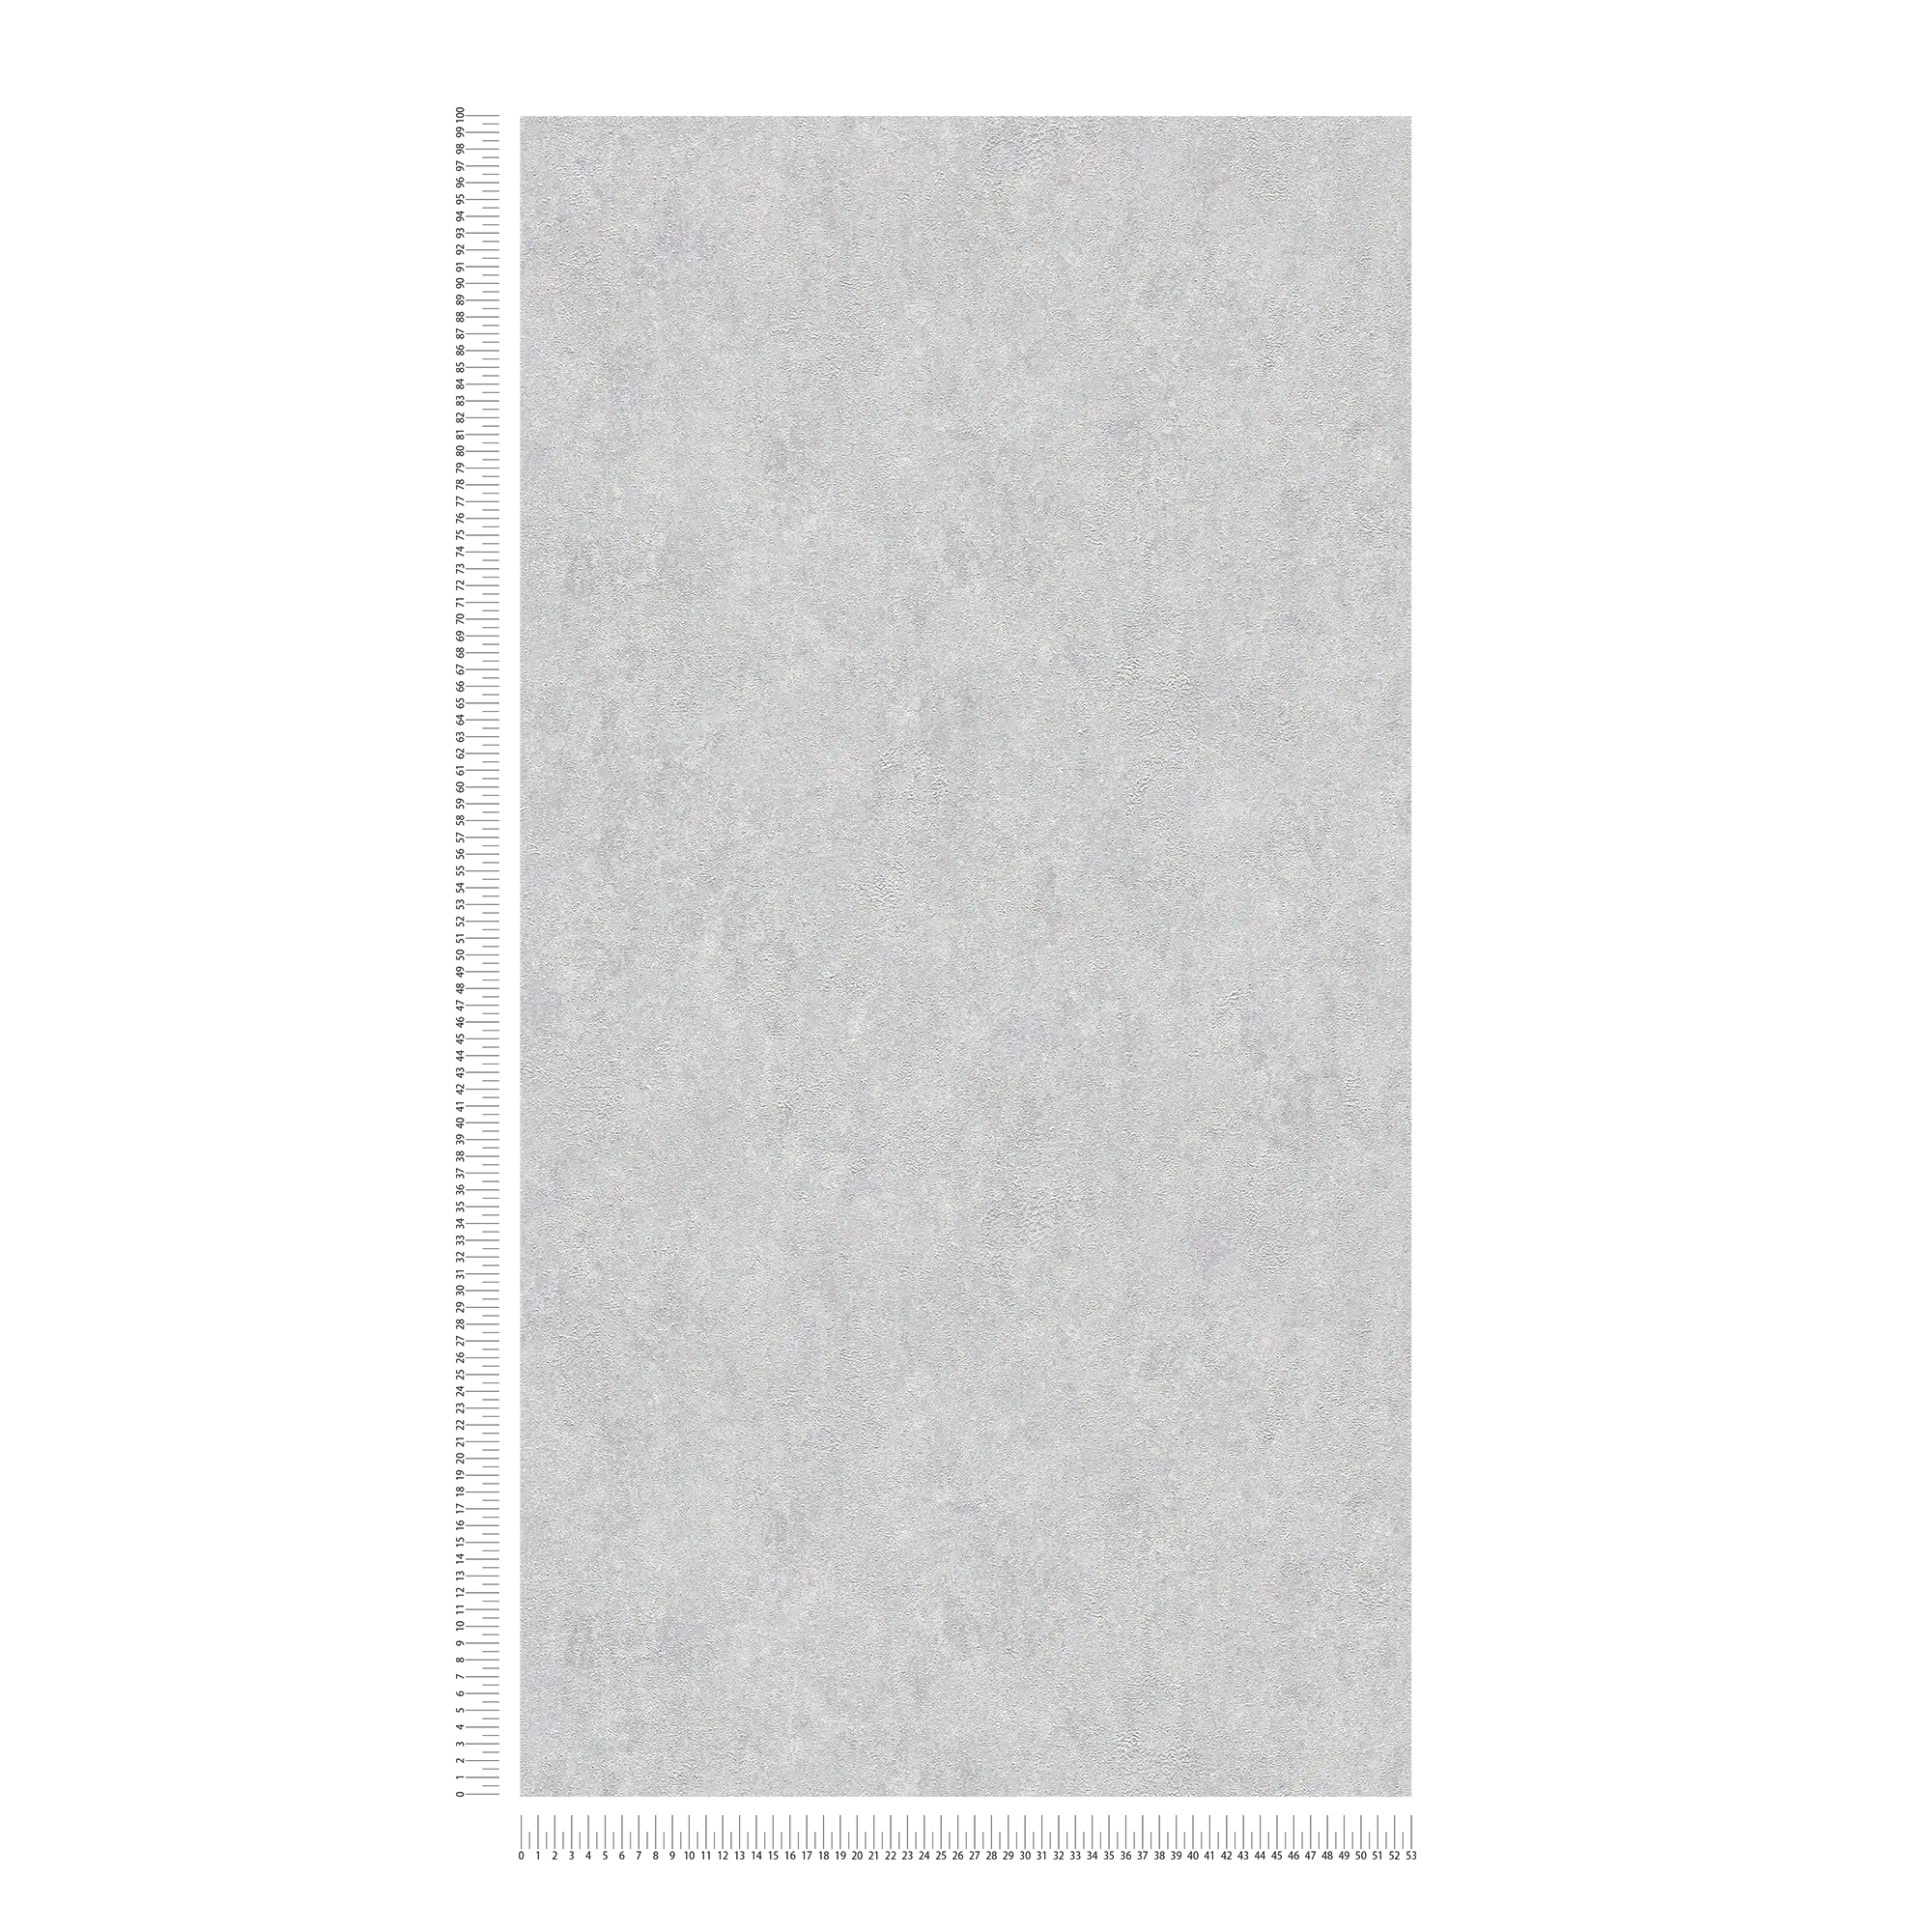             Plain textured wallpaper glossy with metallic effect - grey, silver
        